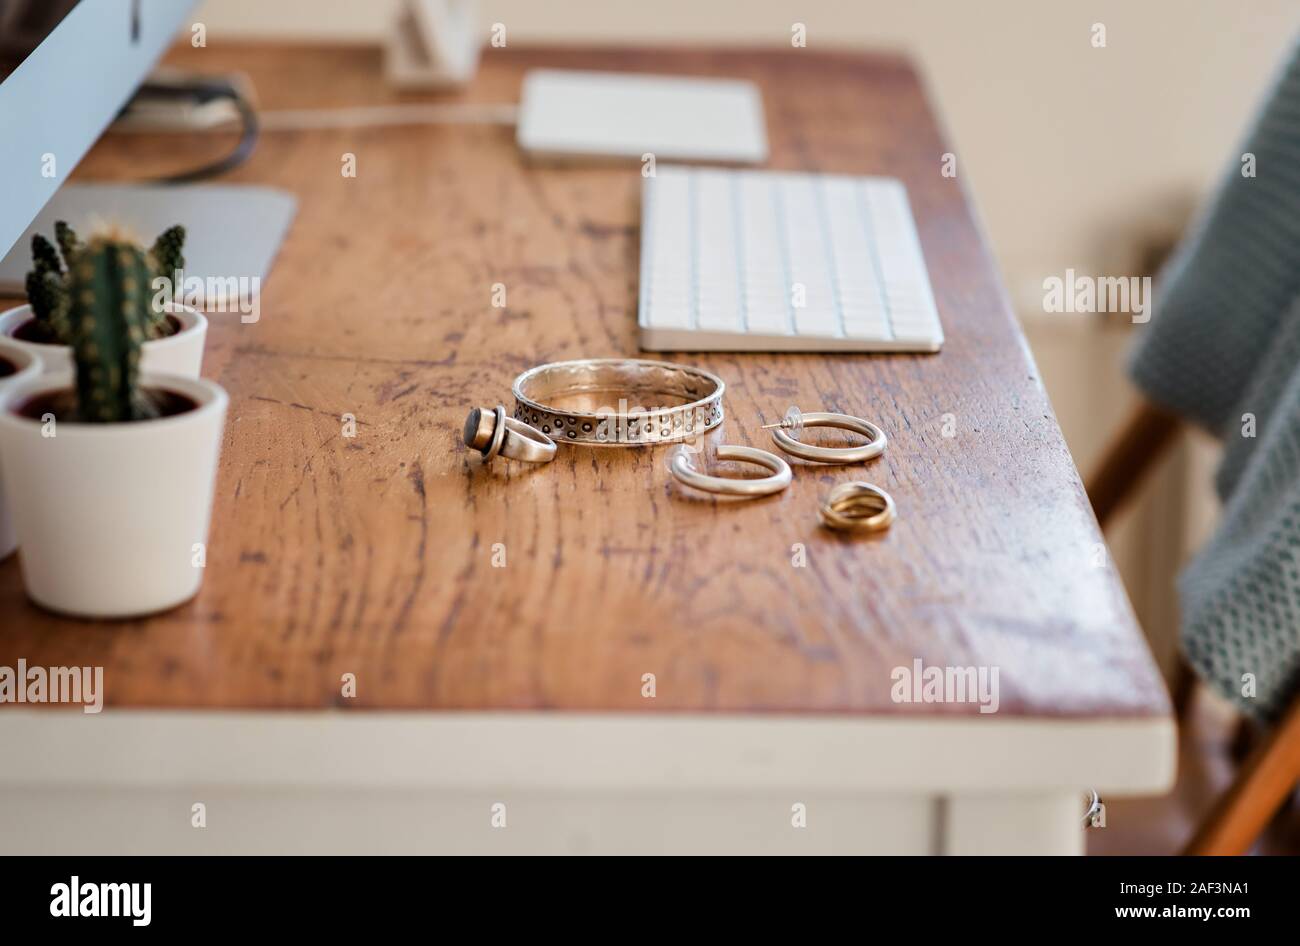 Woman's silver jewellery on a desk next to a computer Stock Photo